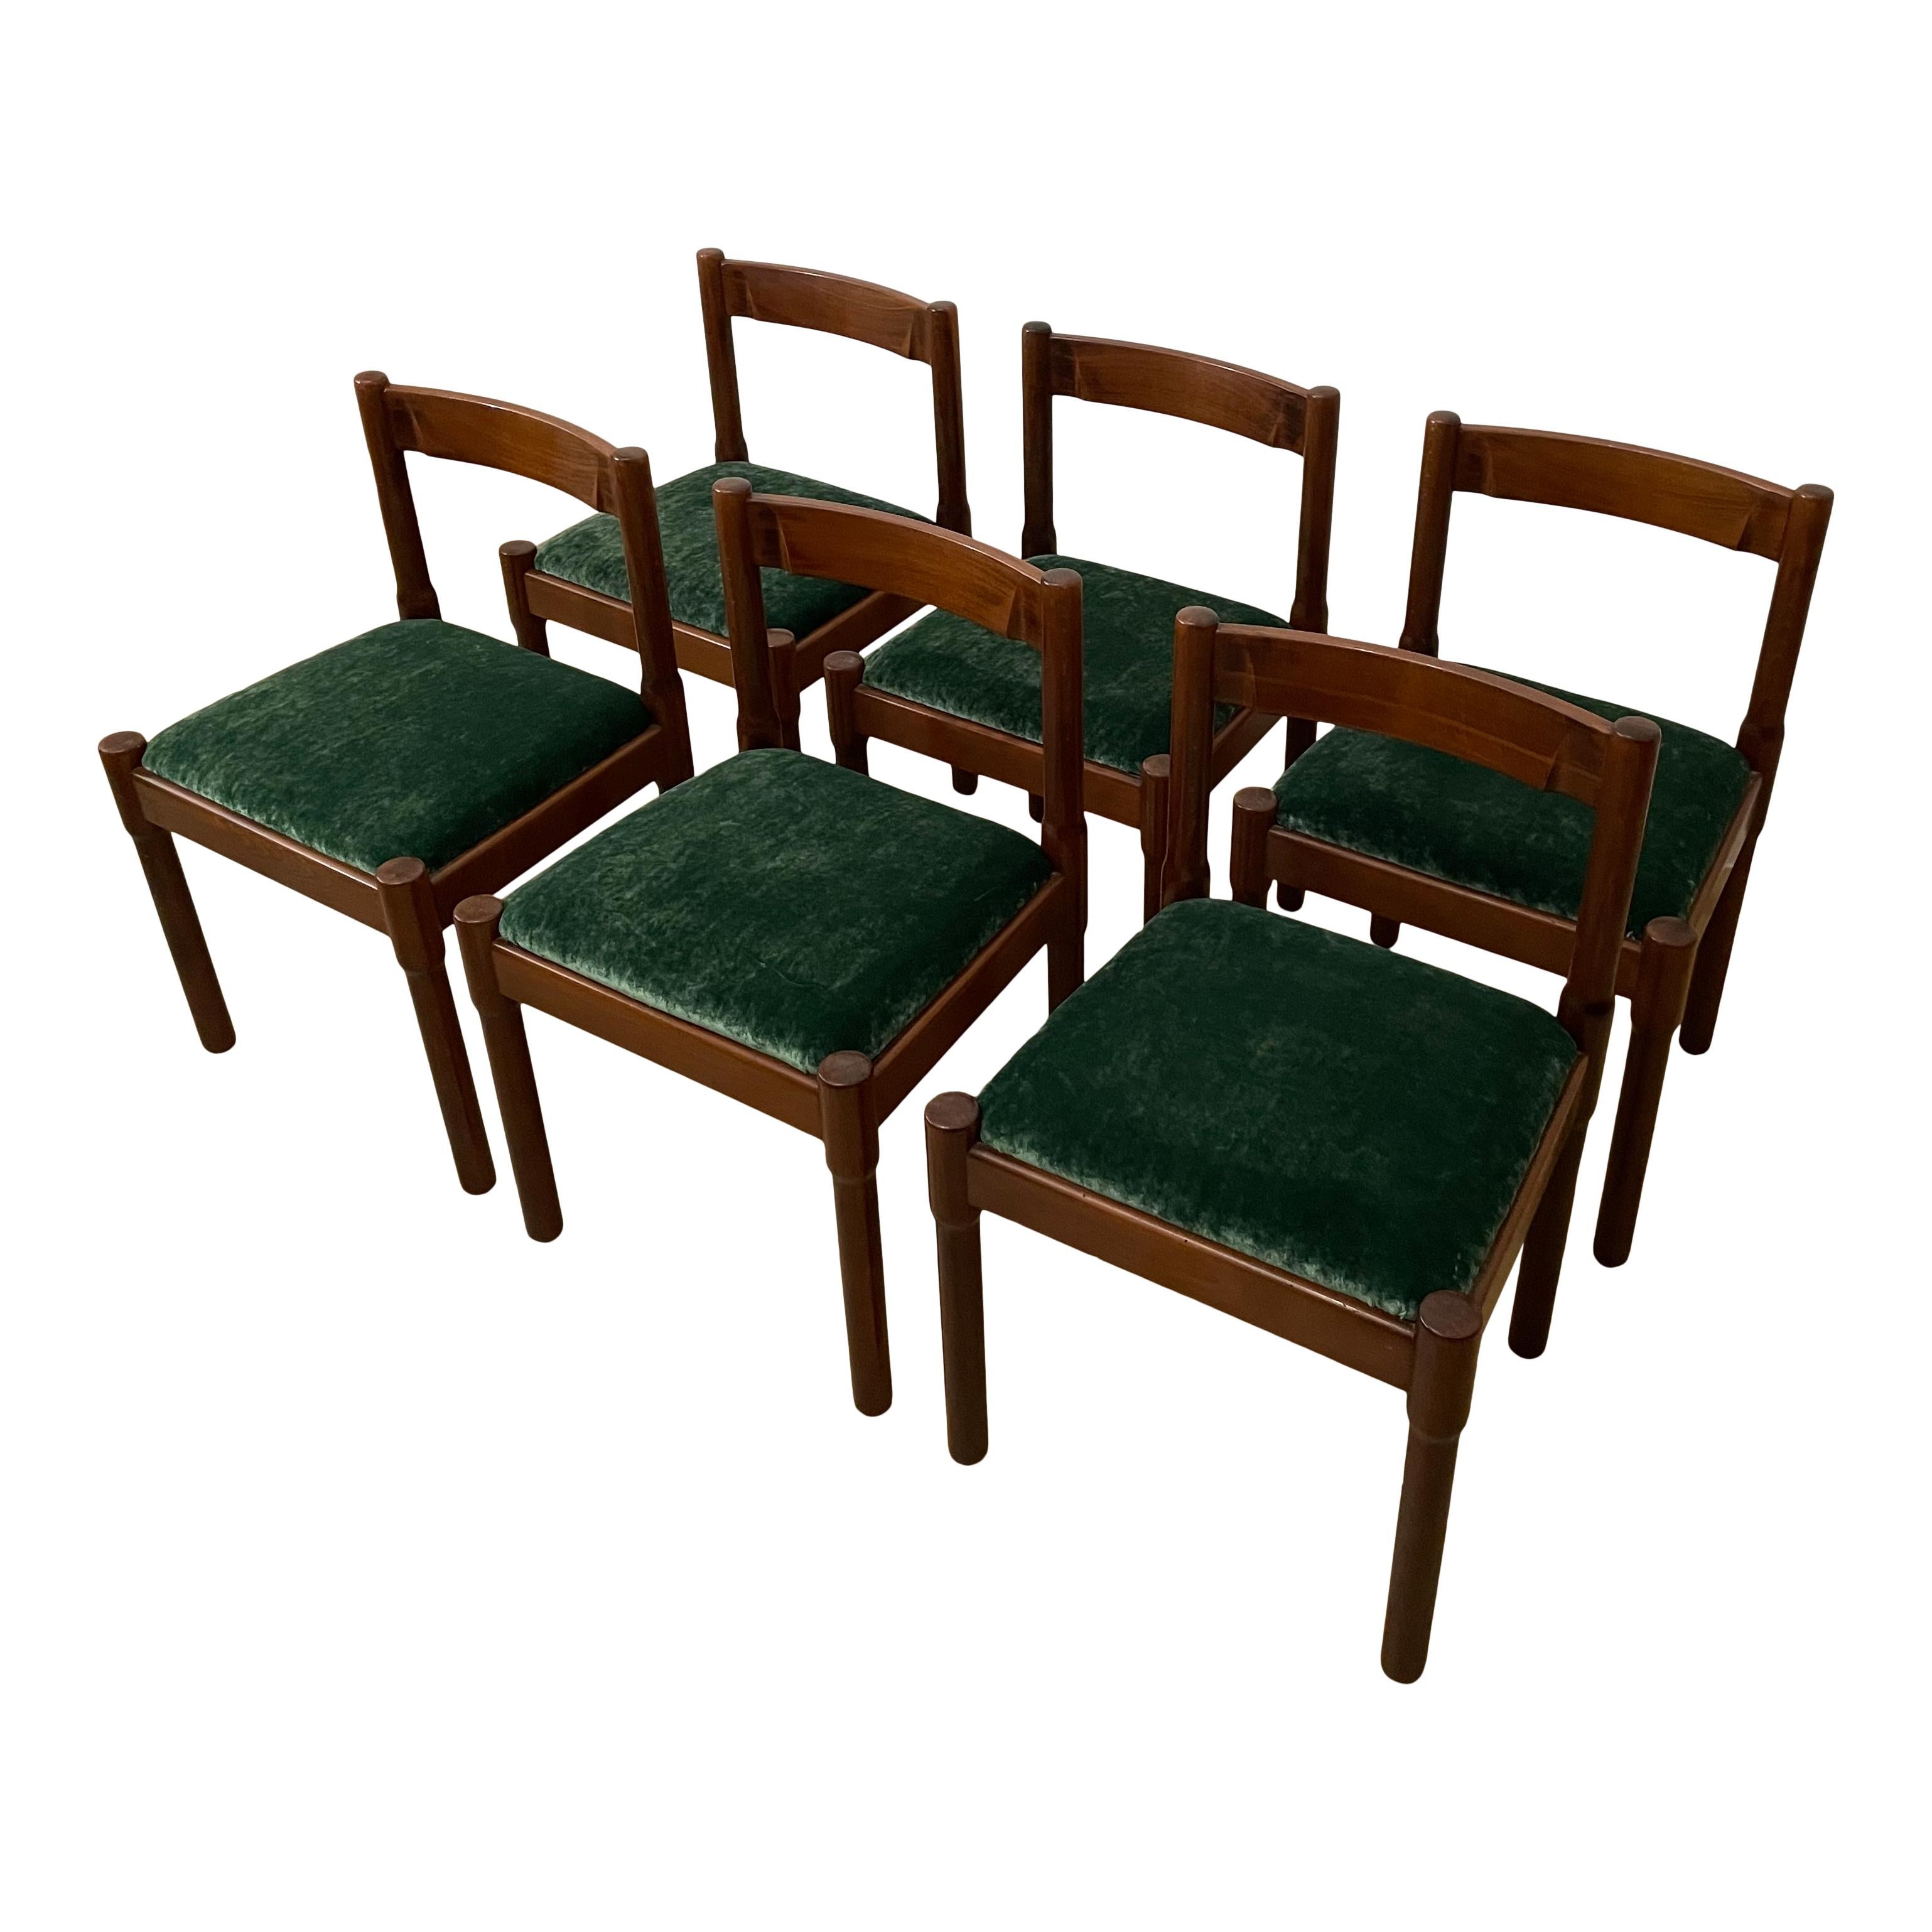 Italian Vico Magistretti Midcentury “Carimate” Dining Chair for Cassina, 1963, Set of 6 For Sale